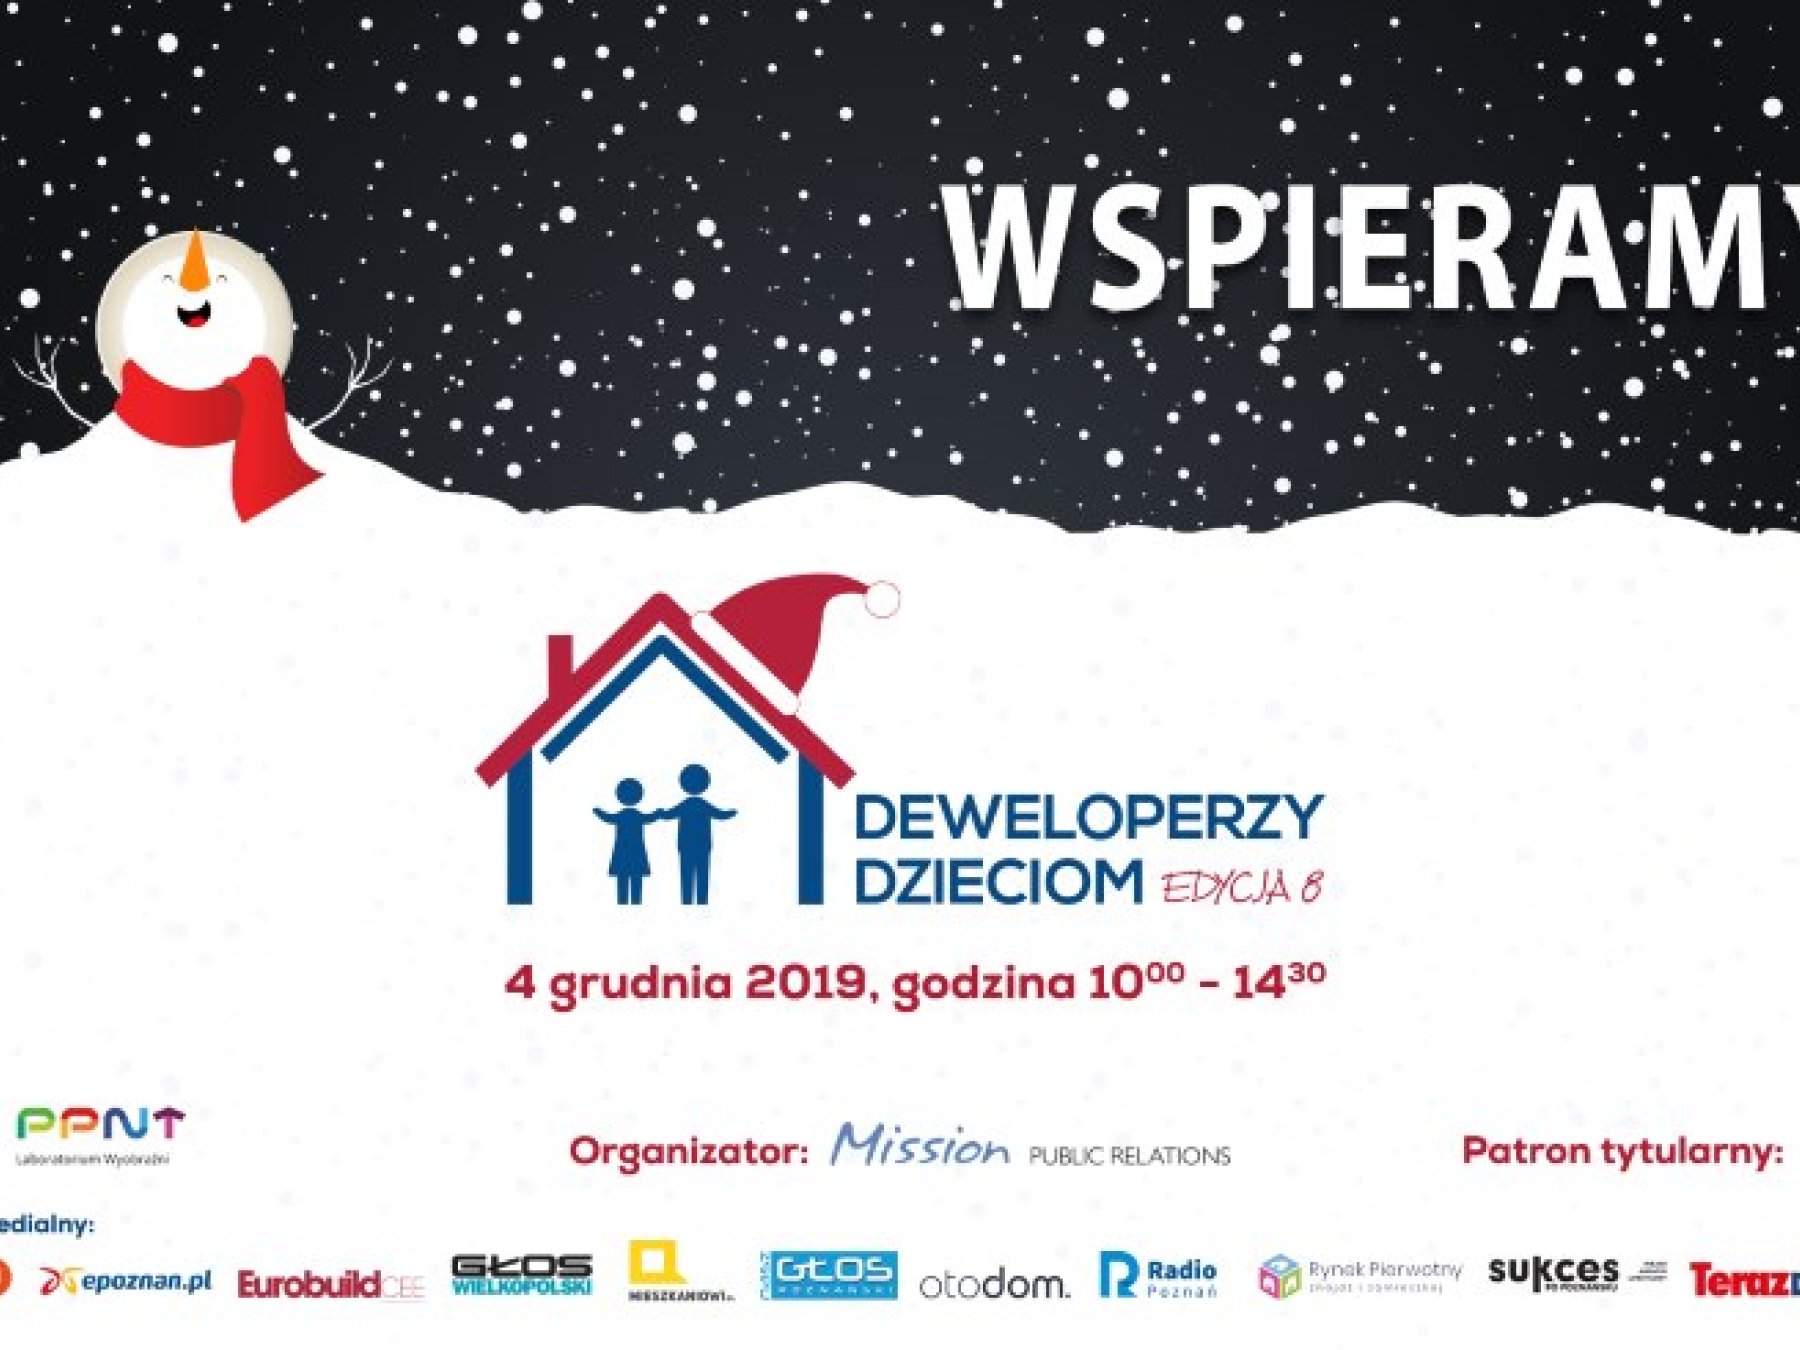 WE SUPPORT THE CAMPAIGN “DEVELOPERS FOR CHILDREN”